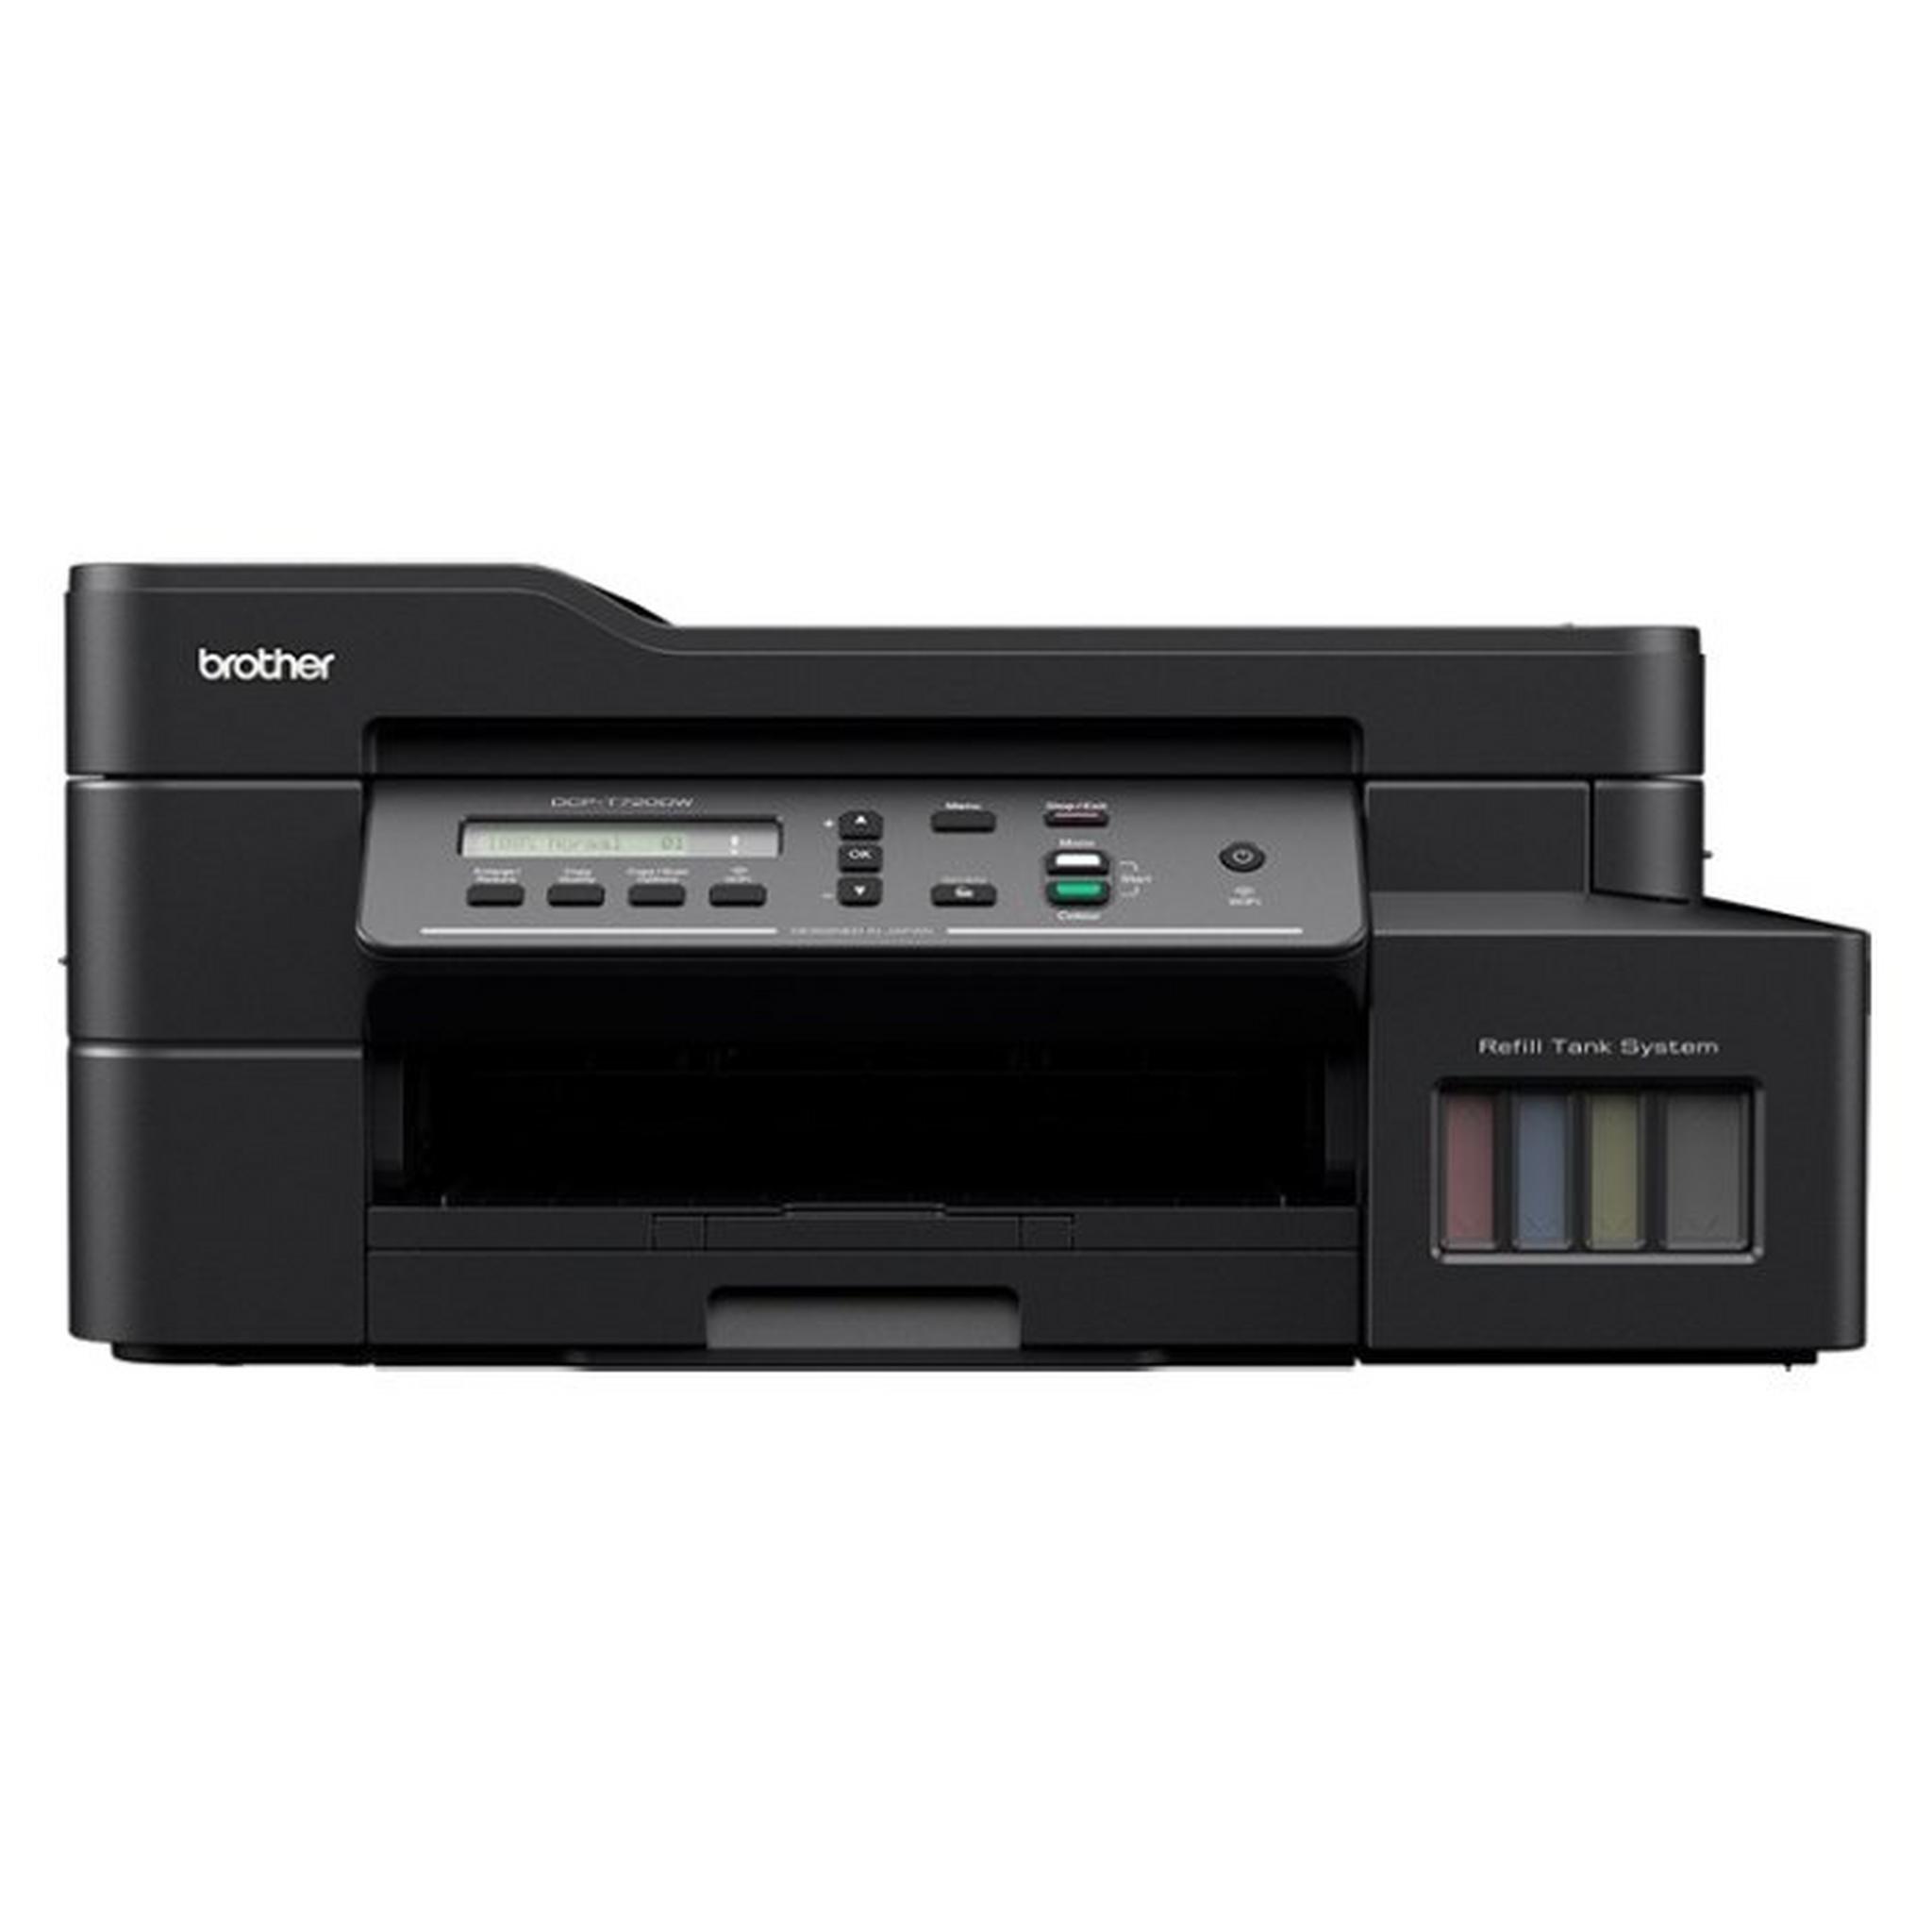 Brother Two-Sided Inkjet Printer (DCP-T720DW)